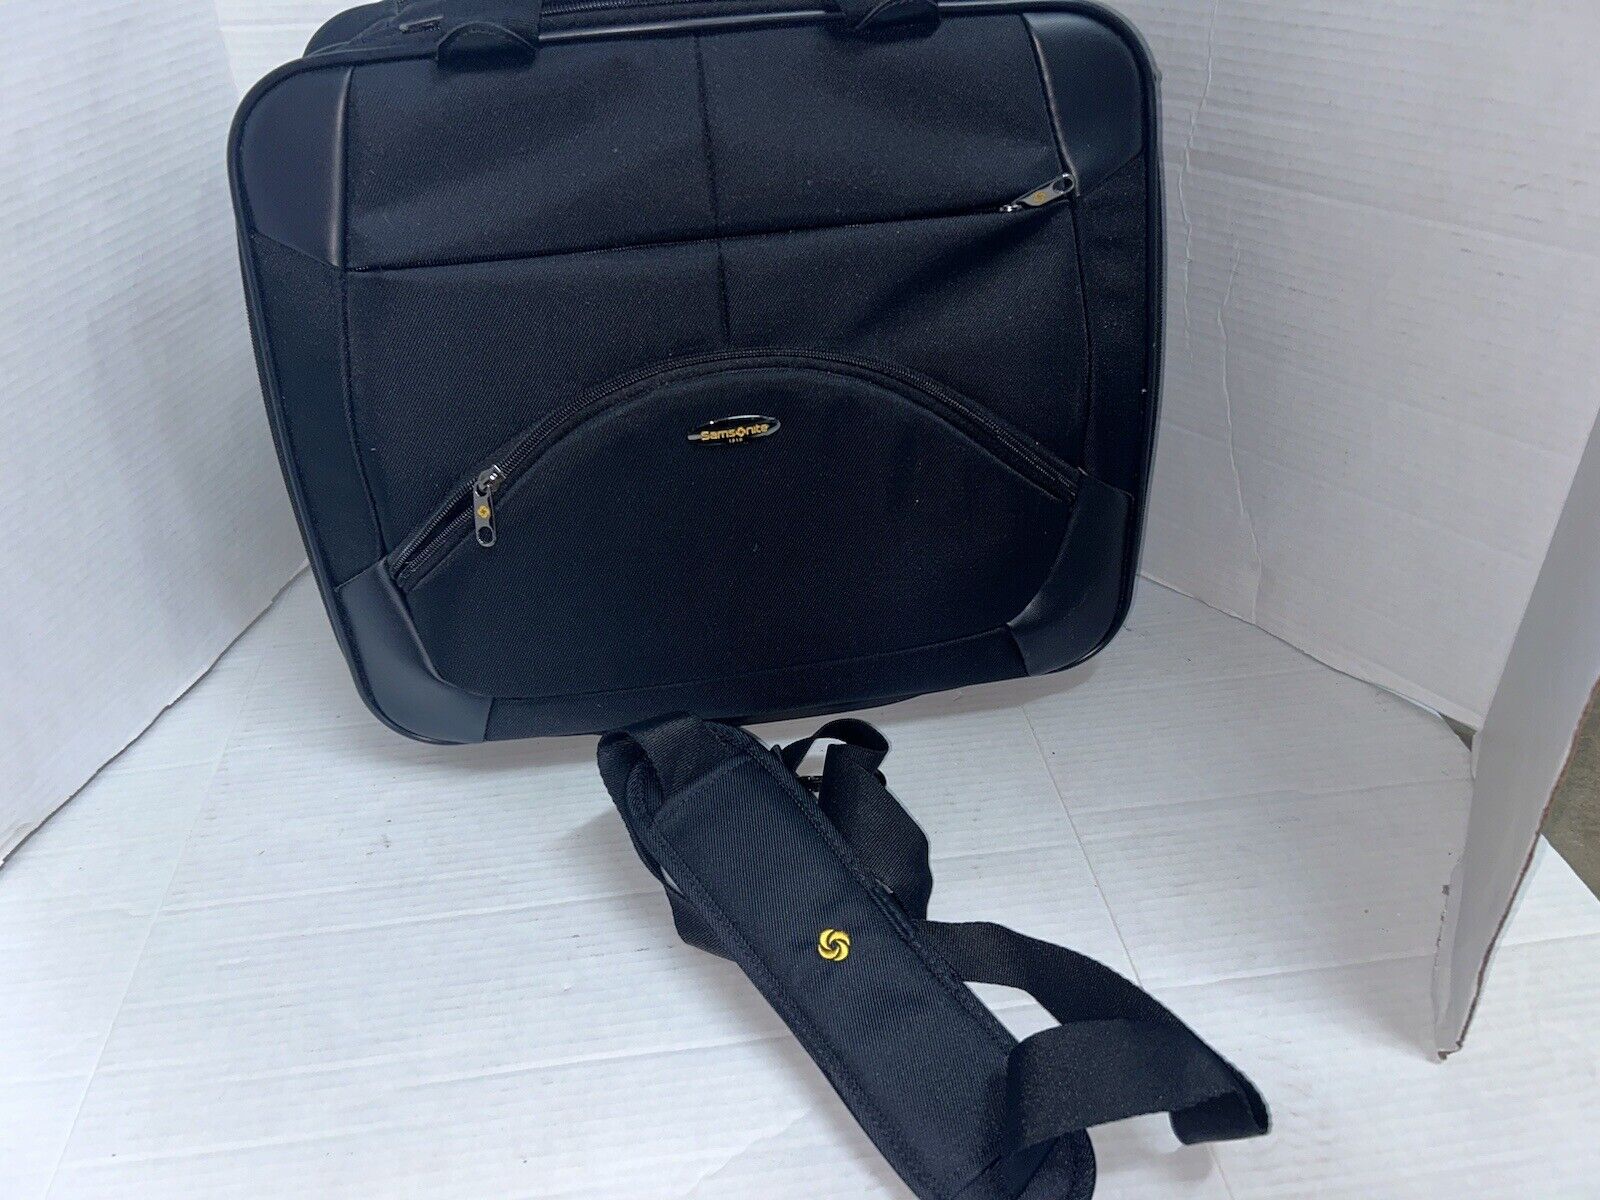 Samsonite Laptop Padded Black Carry-on rolling Business Travel Briefcase